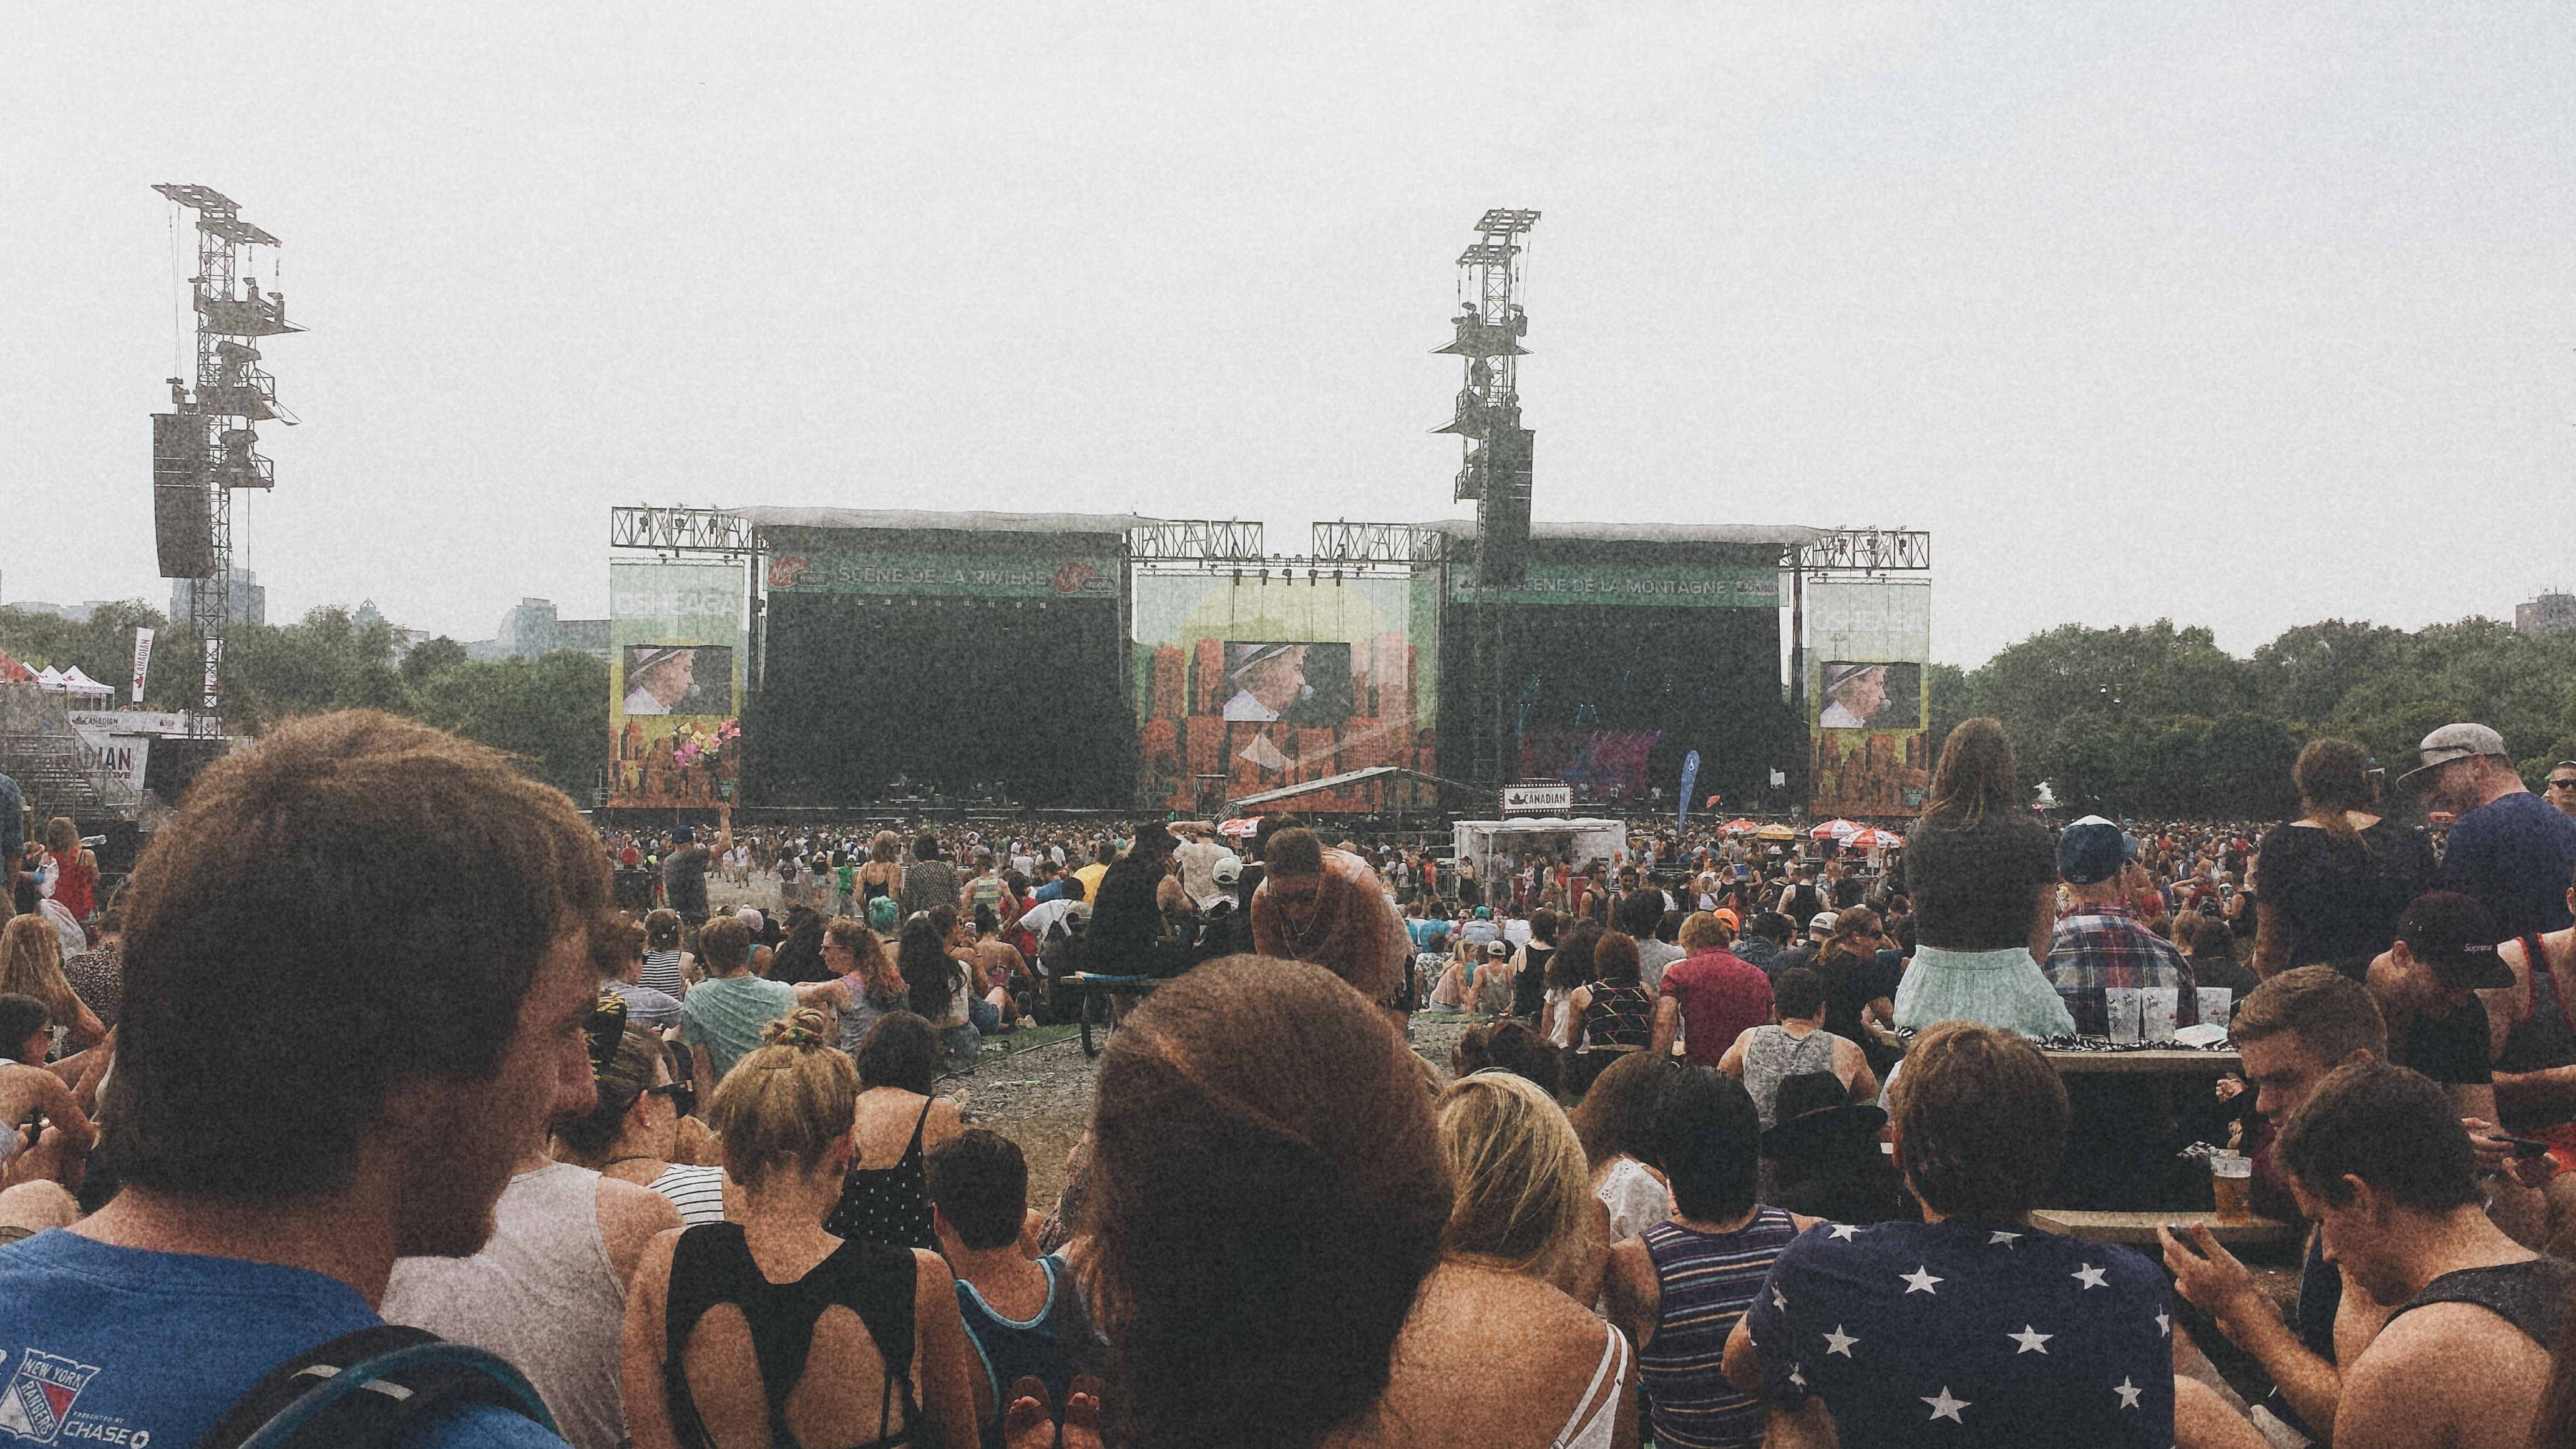 Picture taken at Osheaga Music Festival at the two main stages.